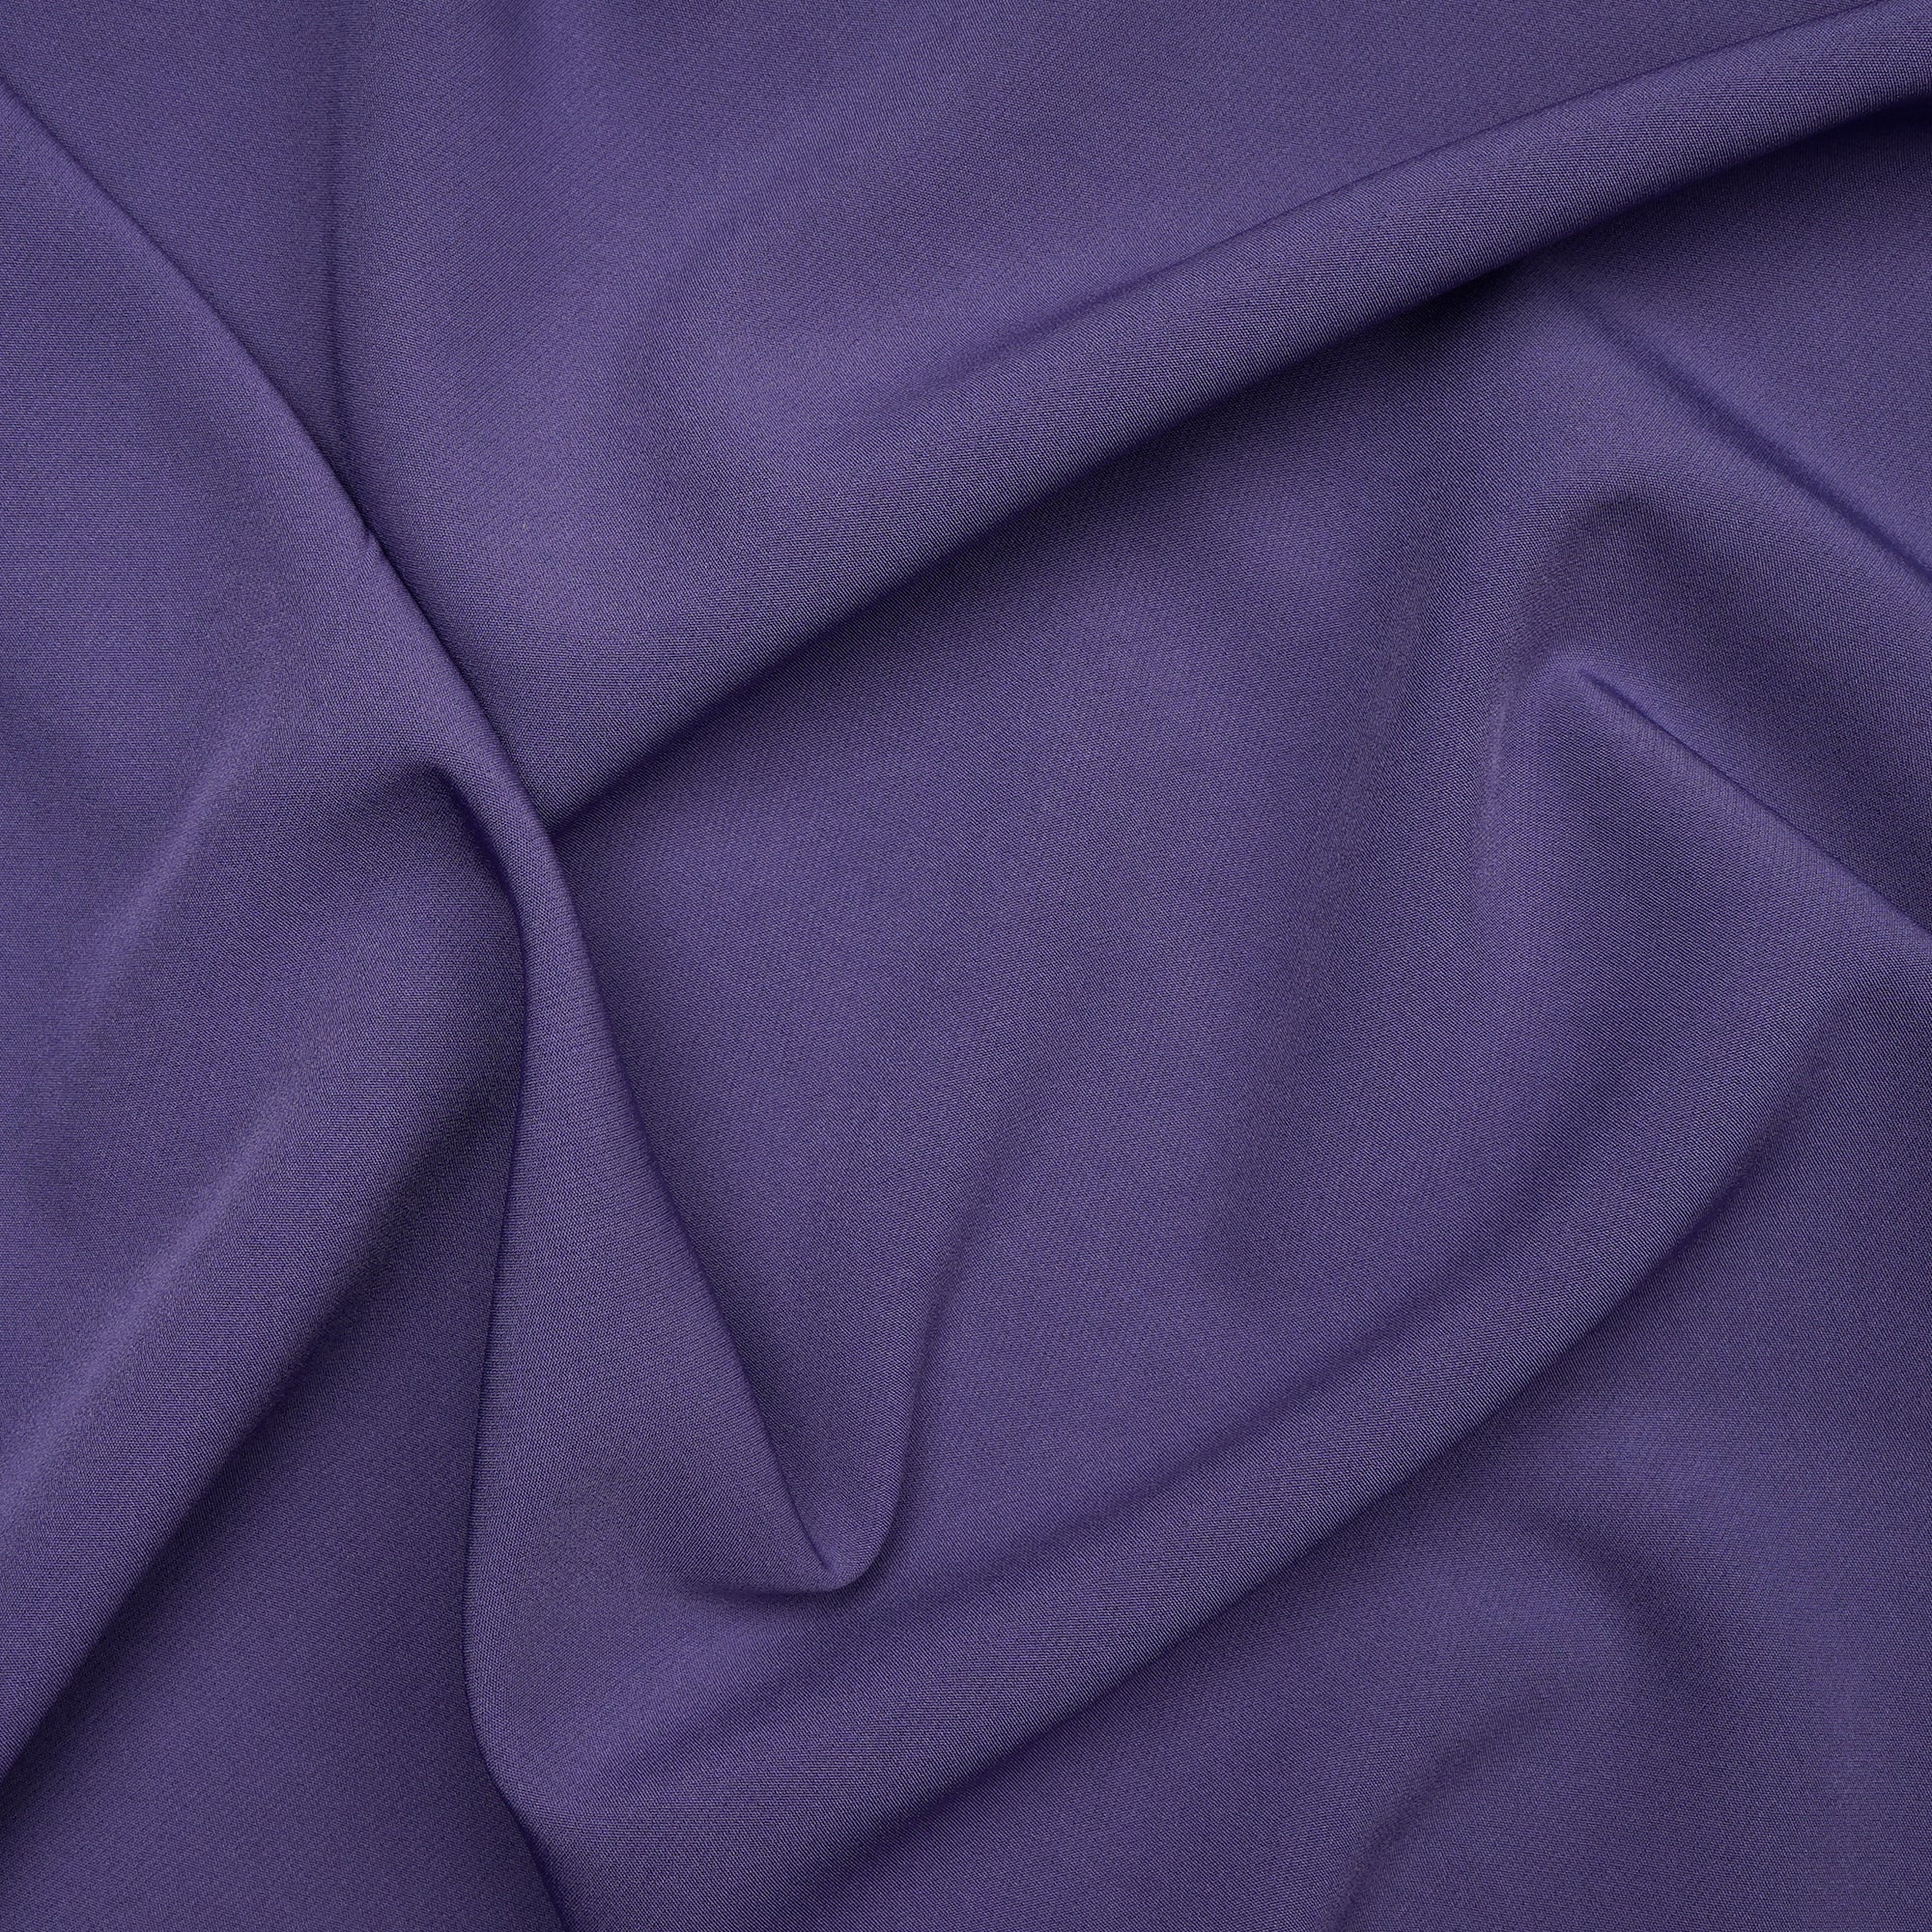 Twilight Purple Solid Dyed Imported Banana Crepe Fabric (60" Width)